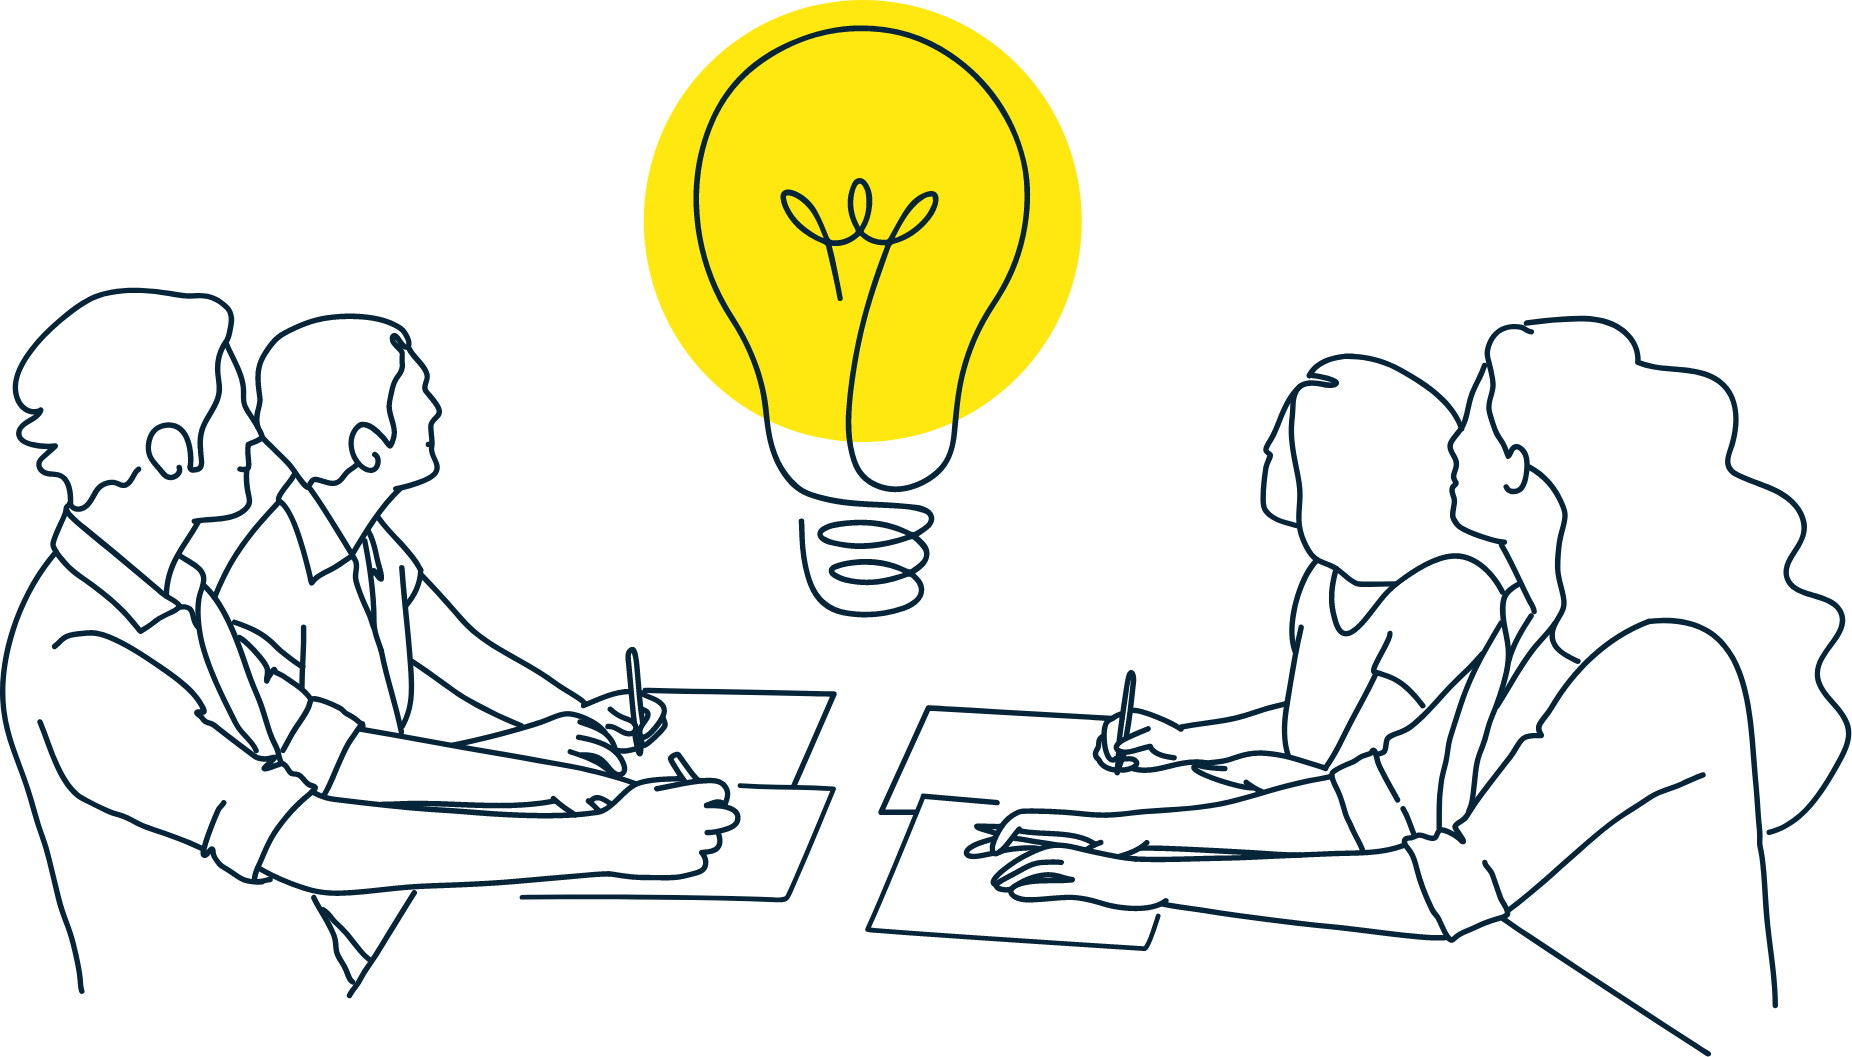 Illustration of four people sitting at a table taking notes and looking up at a bright lightbulb that represents ideas